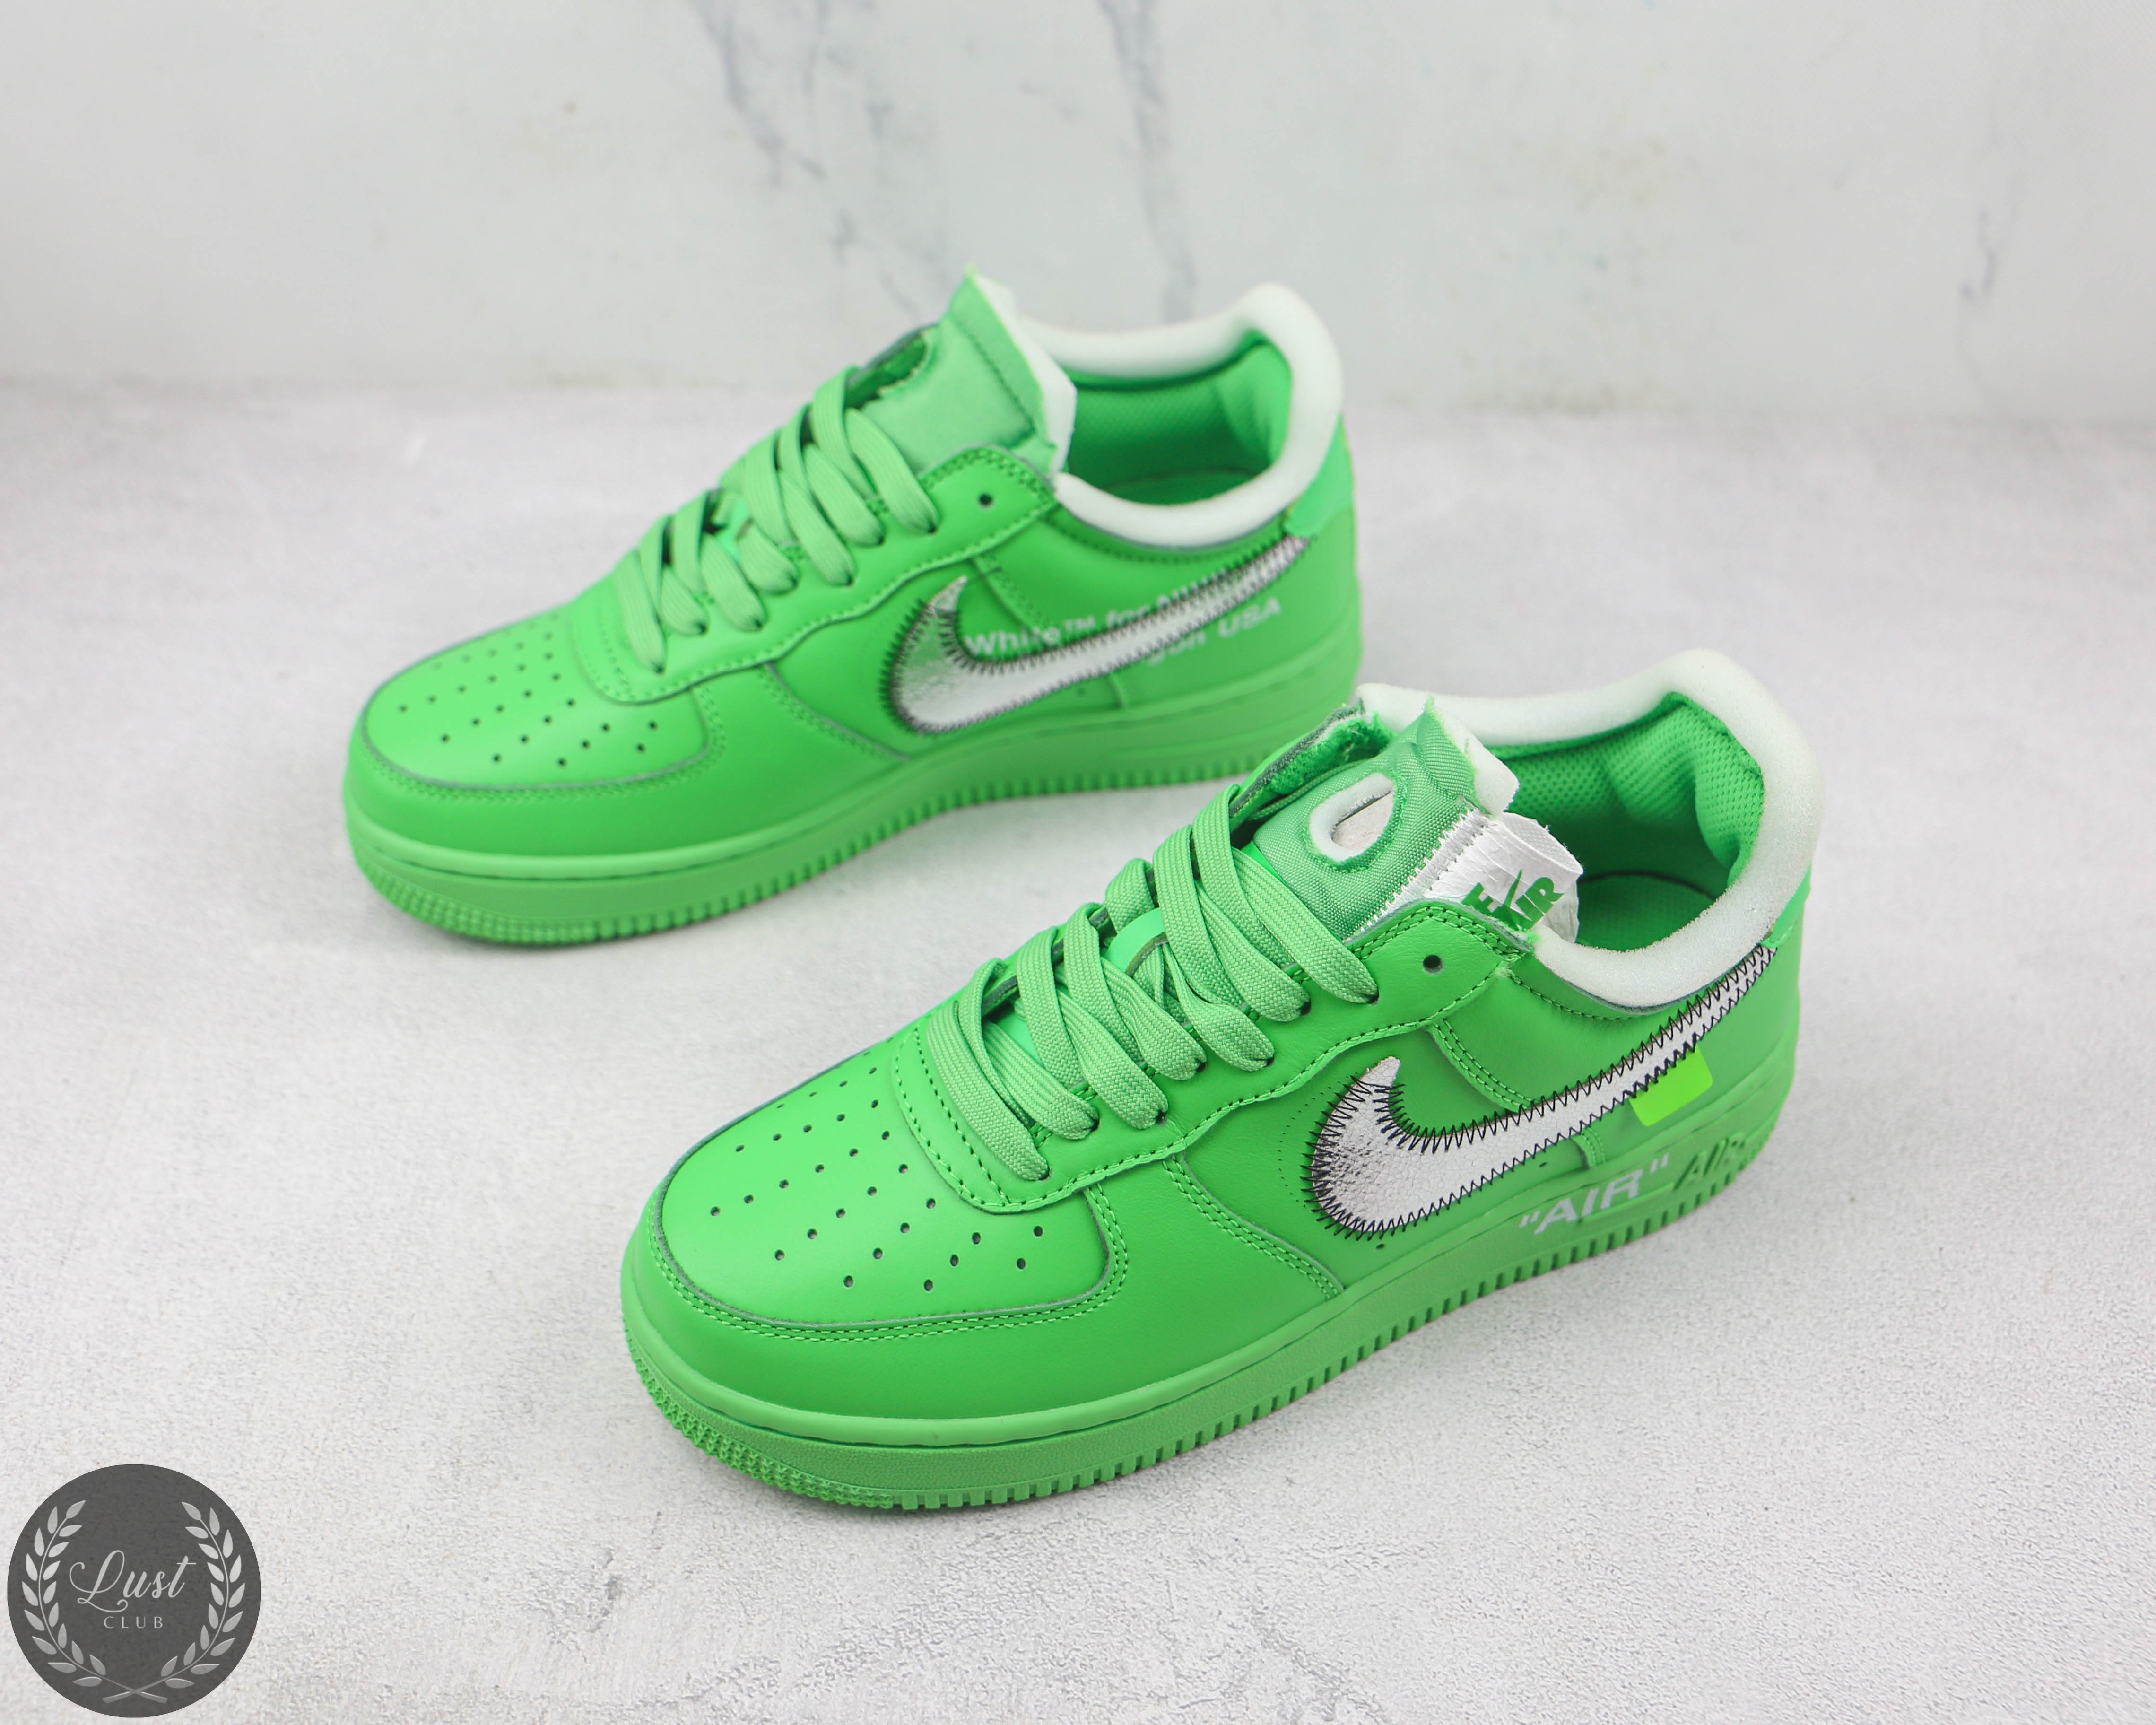 Nike Air force 1 Low Off White Light Green Spark